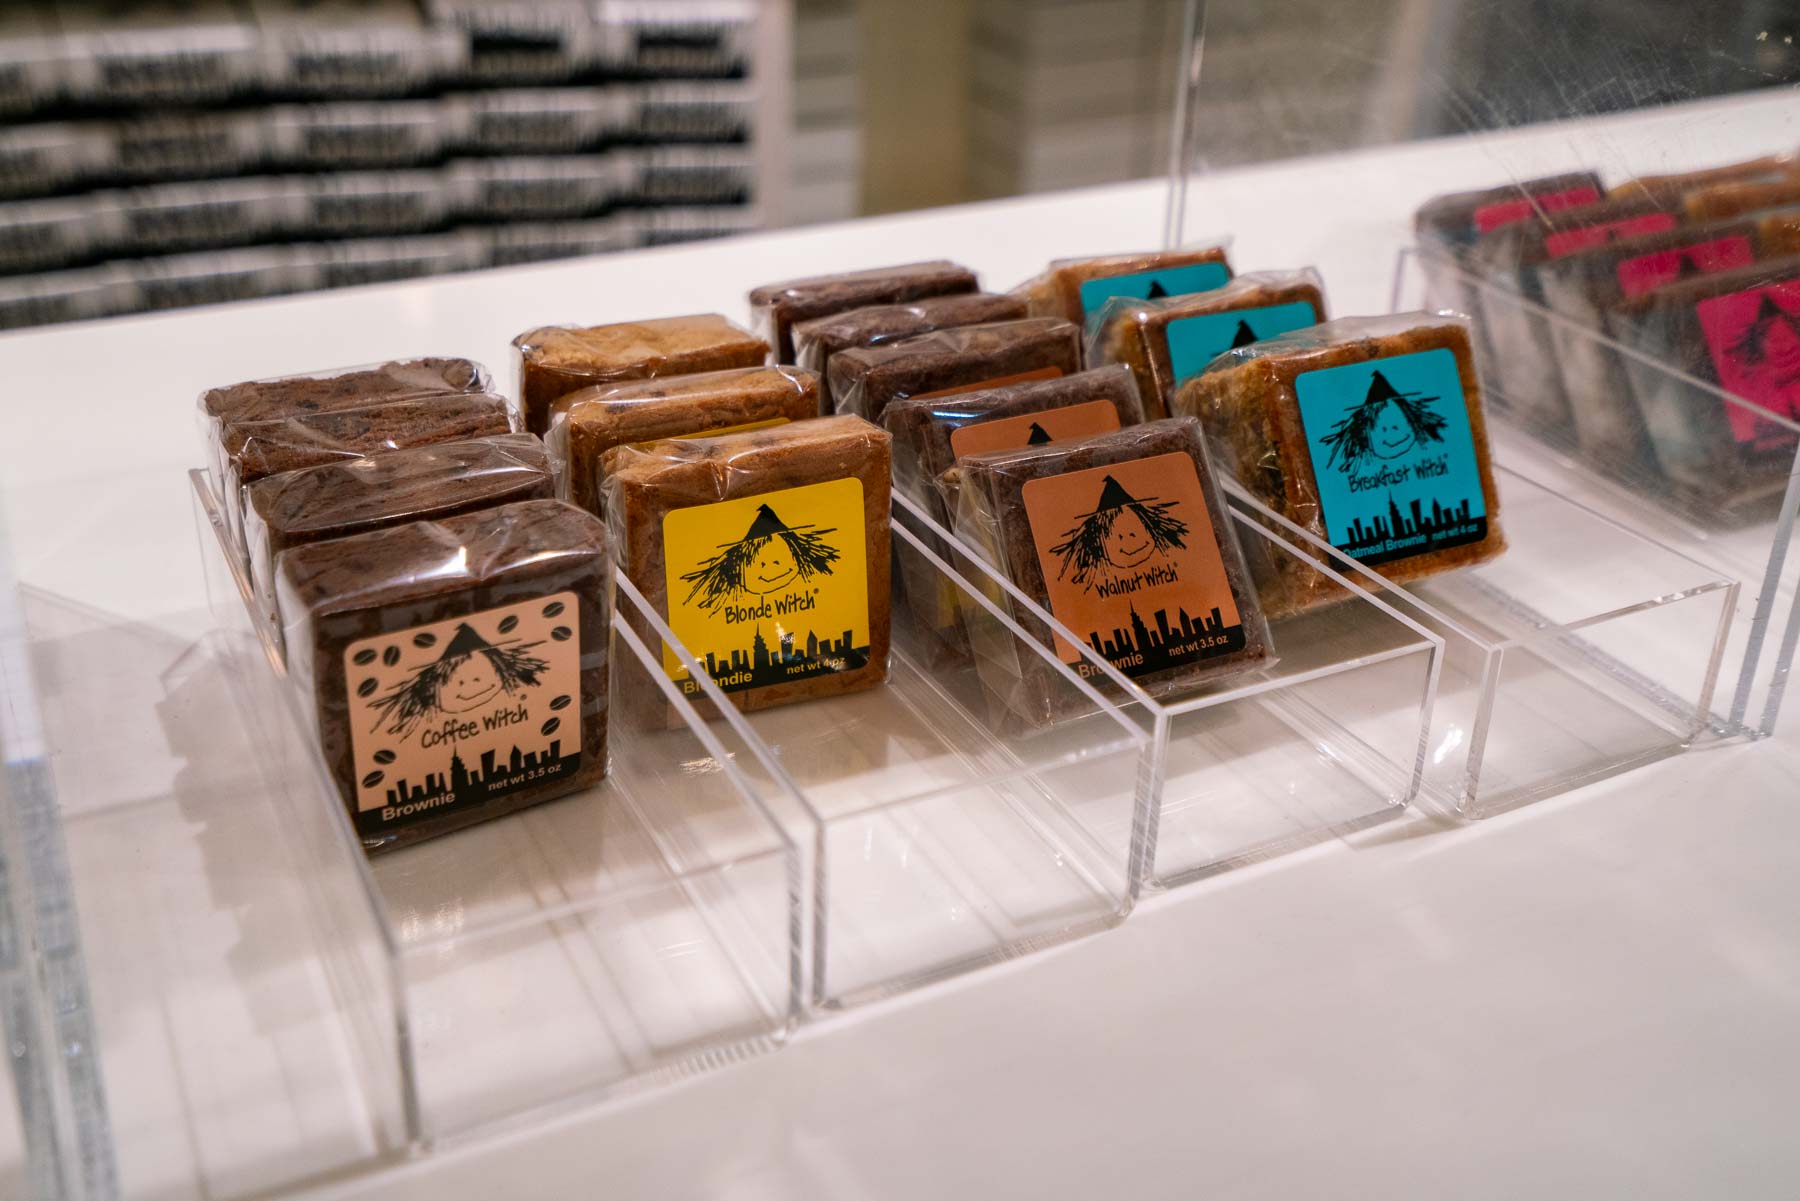 Selection of packaged brownies from Fat Witch Bakery, the best desserts at the Chelsea Market